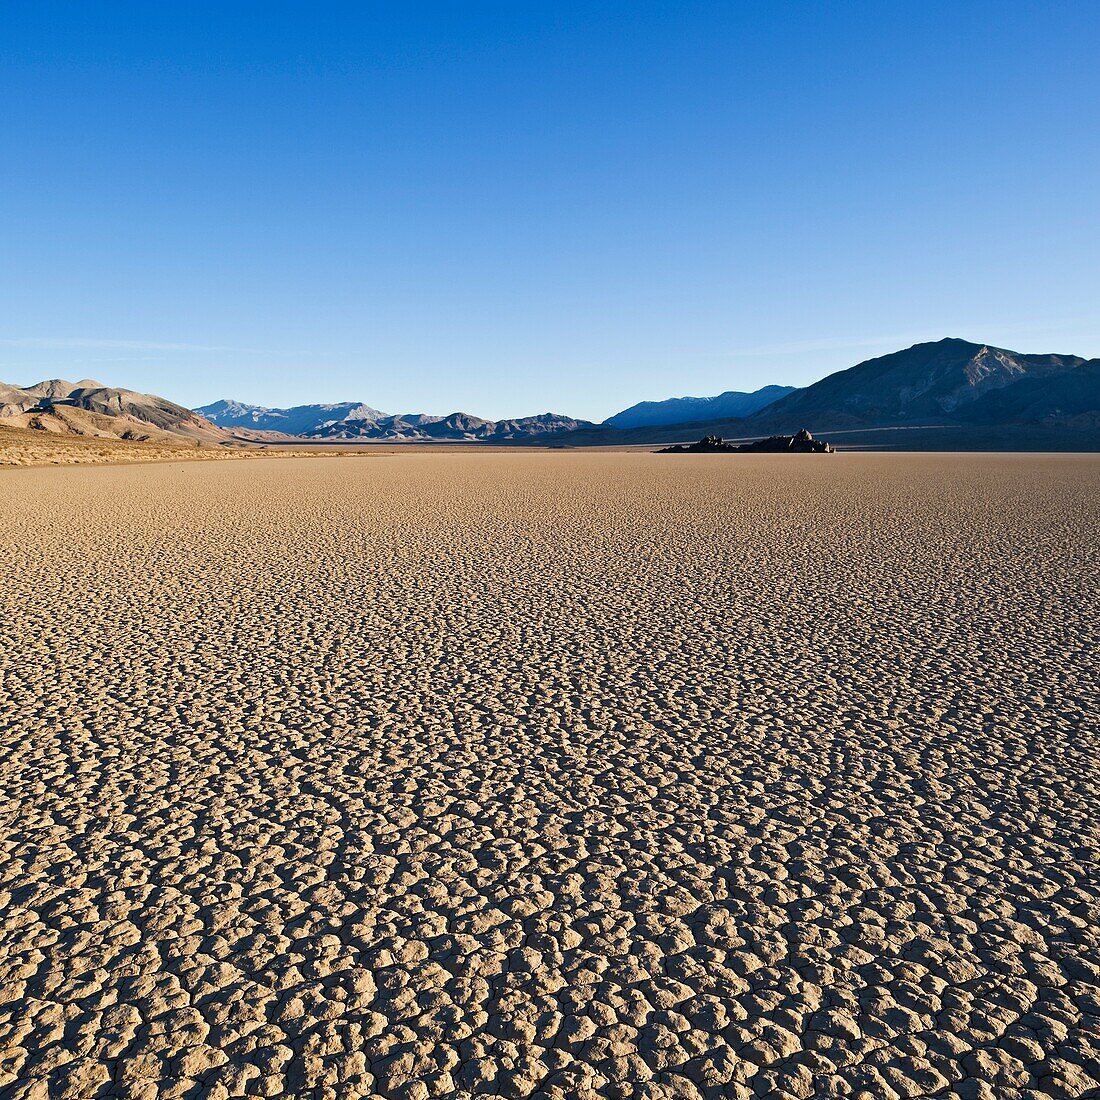 Dry lake bed of the Racetrack playa, Death Valley national park, California